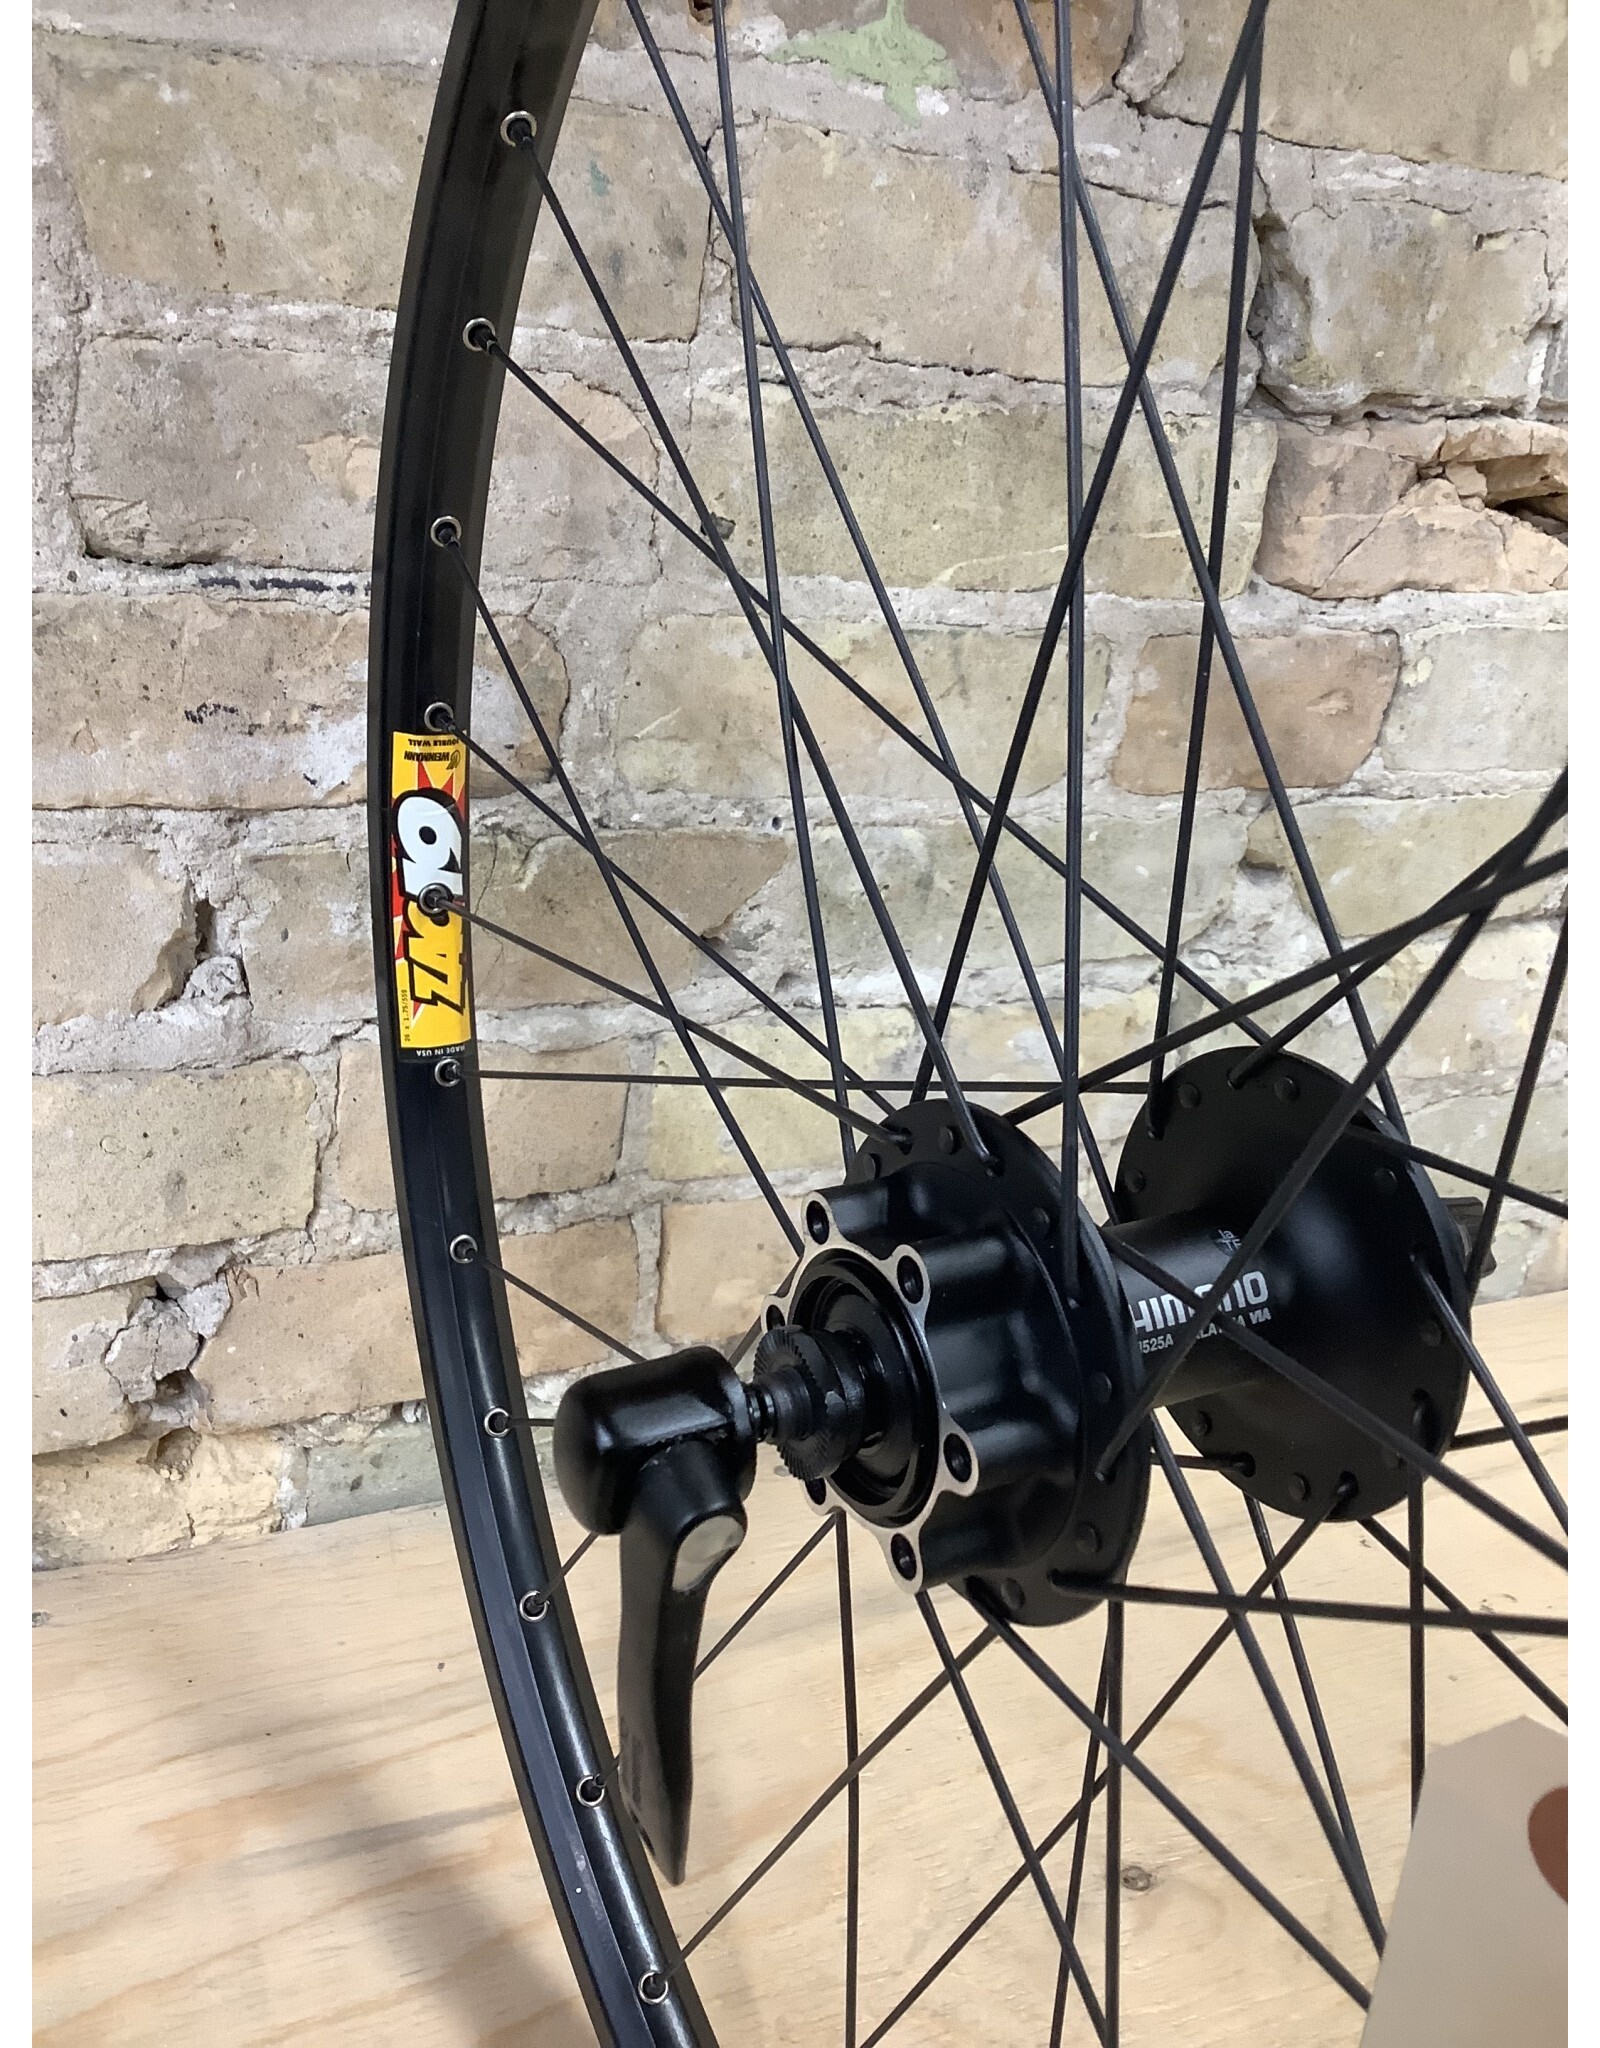 Natural Cycleworks HandBuilt Wheel 26" - ZAC19 - Black Butted Spokes Deore Disc Front